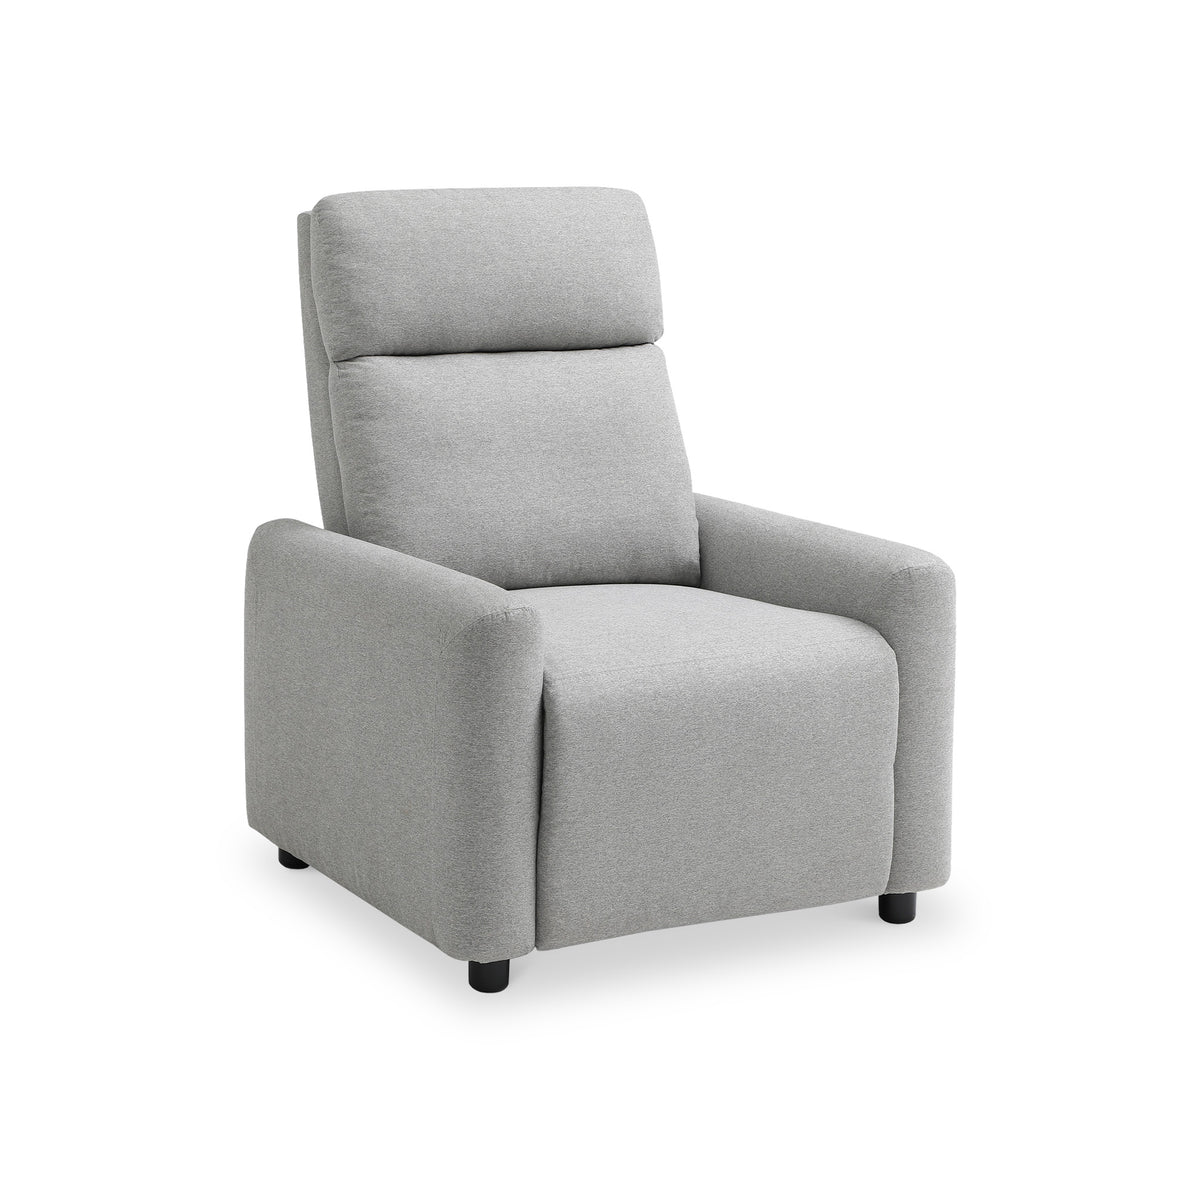 Fairford Grey Faux Wool Reclining Armchair from Roseland Furniture